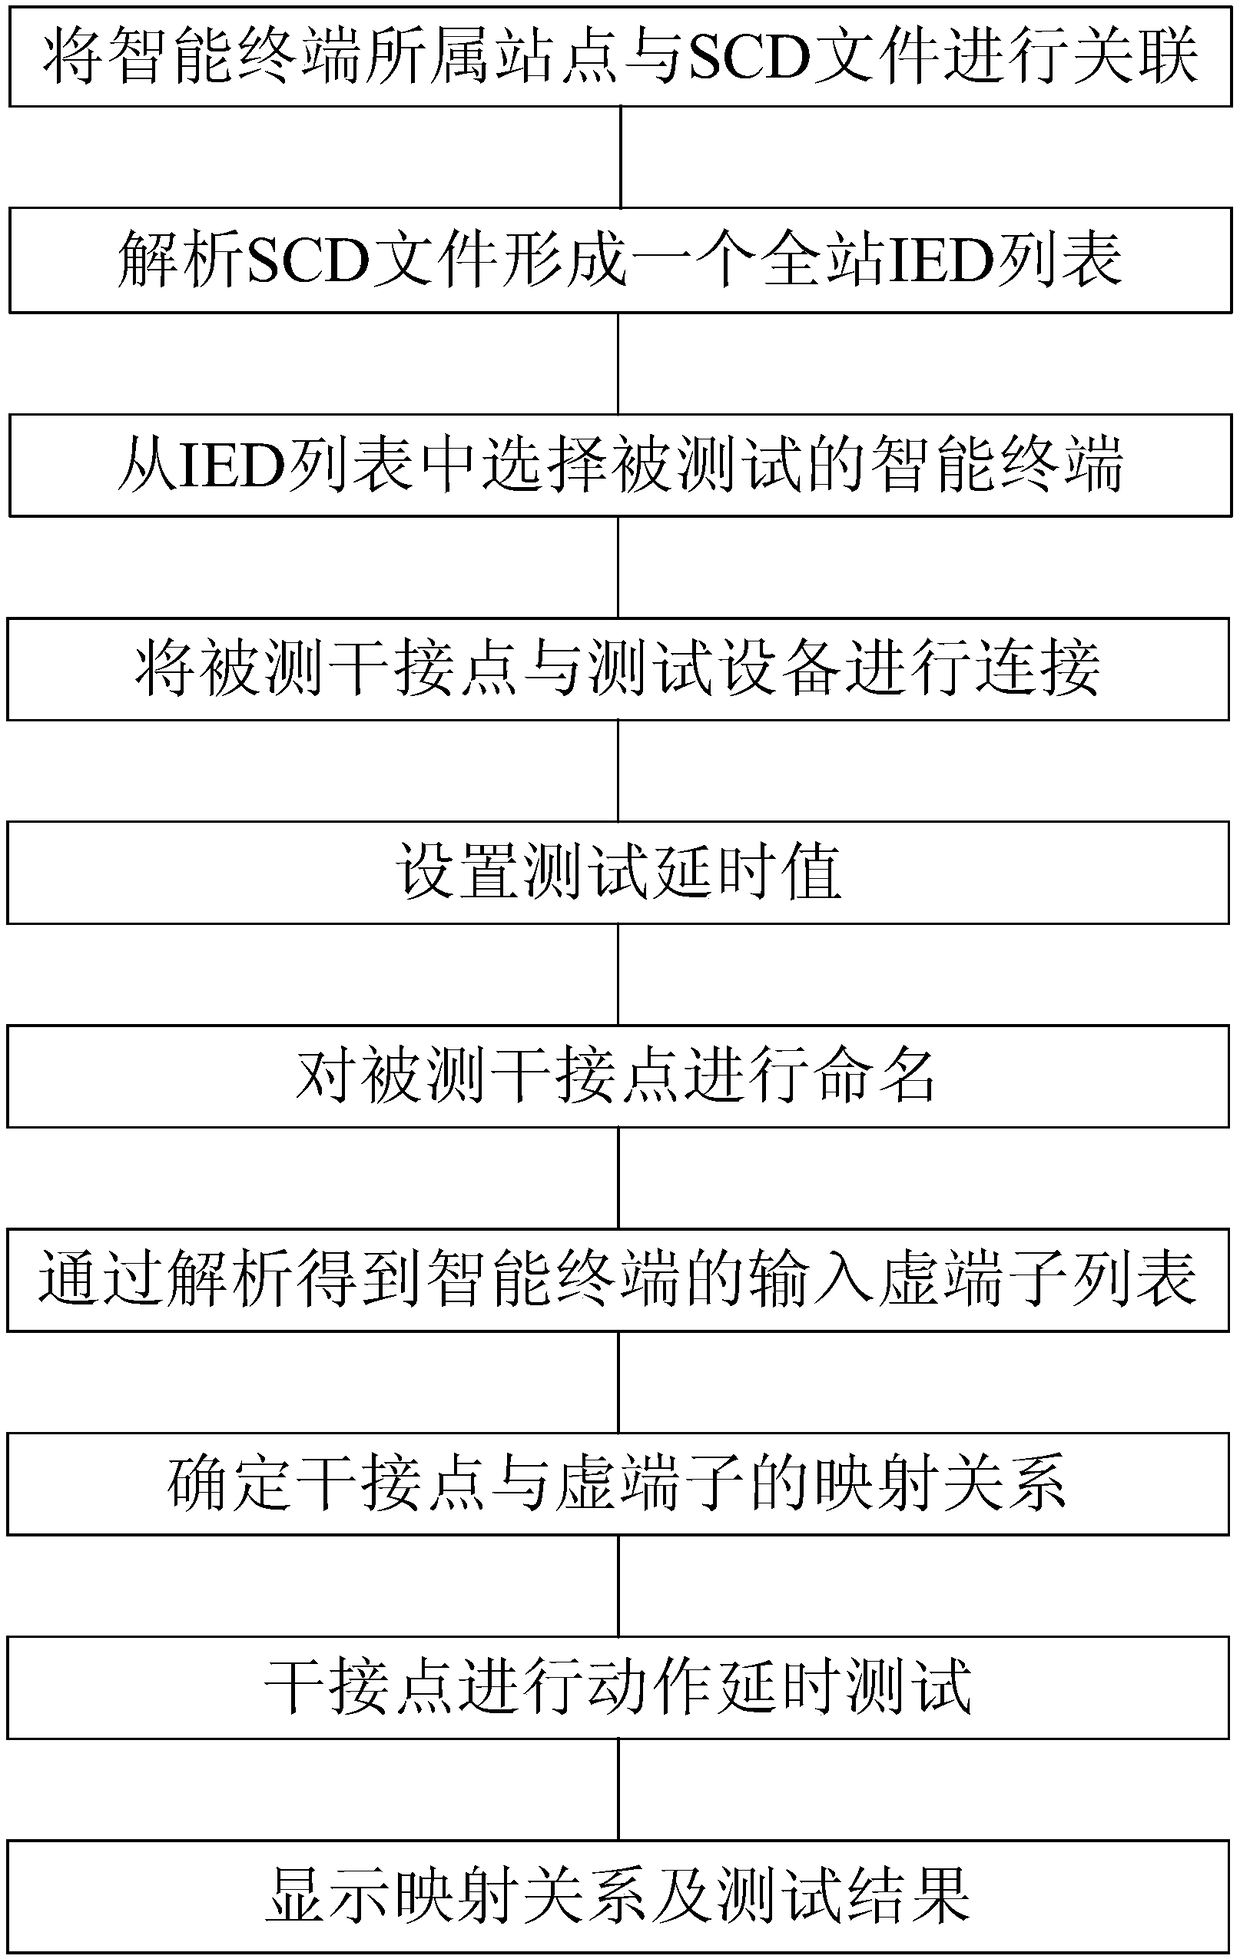 Test method for dry contact action delay of intelligent terminal equipment